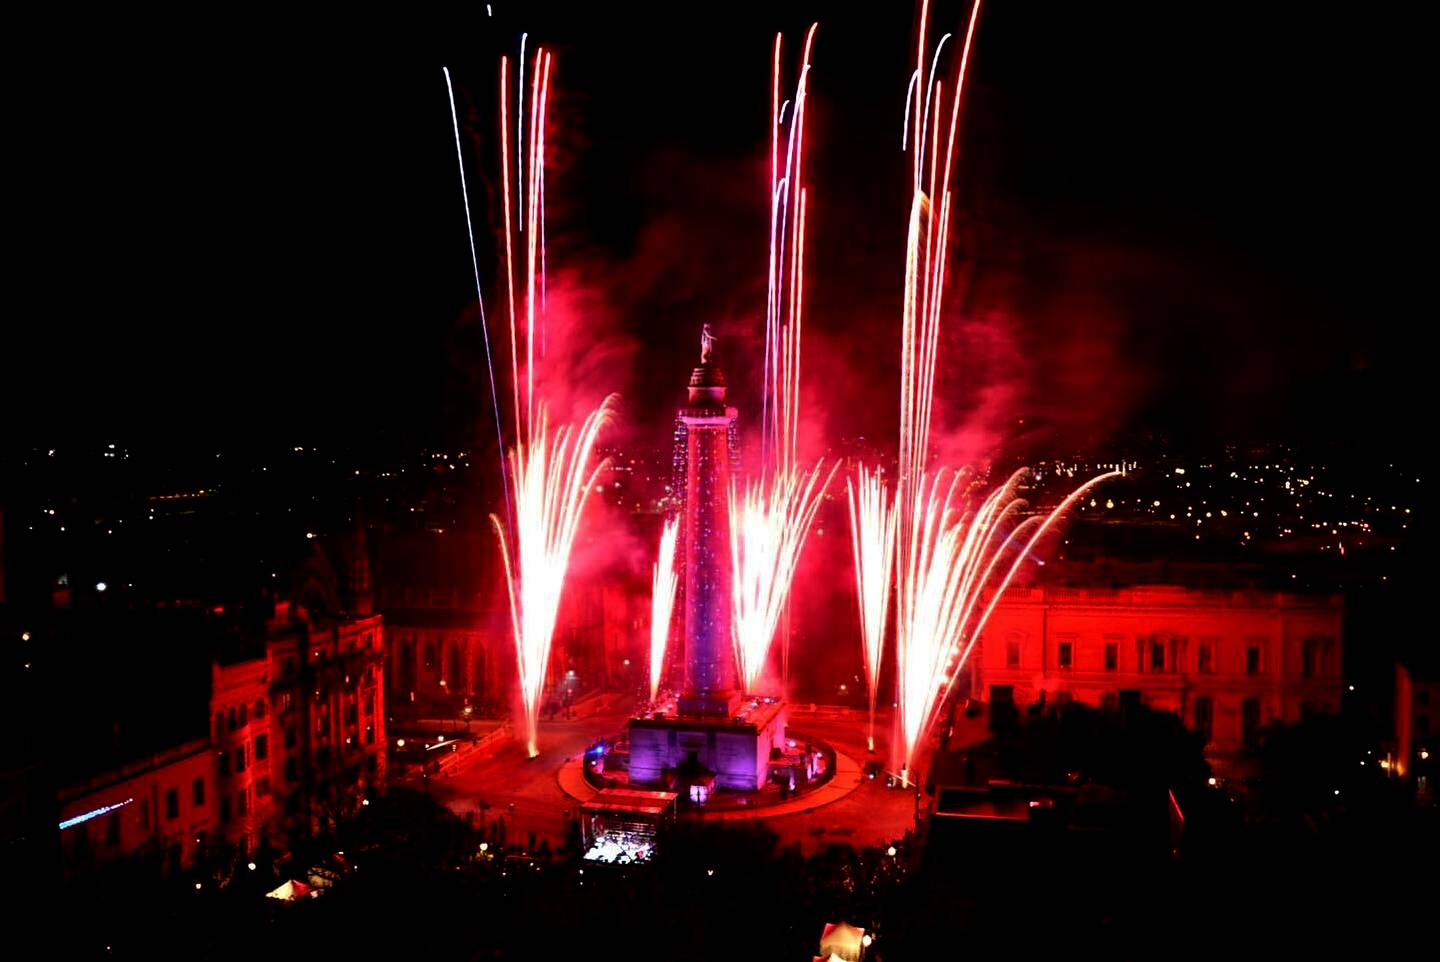 Fireworks ignite the sky at the 51st Monument Lighting in Mount Vernon Thursday night, kicking off the start of December’s holiday season, seen from Topside in hotel Revival in Baltimore.